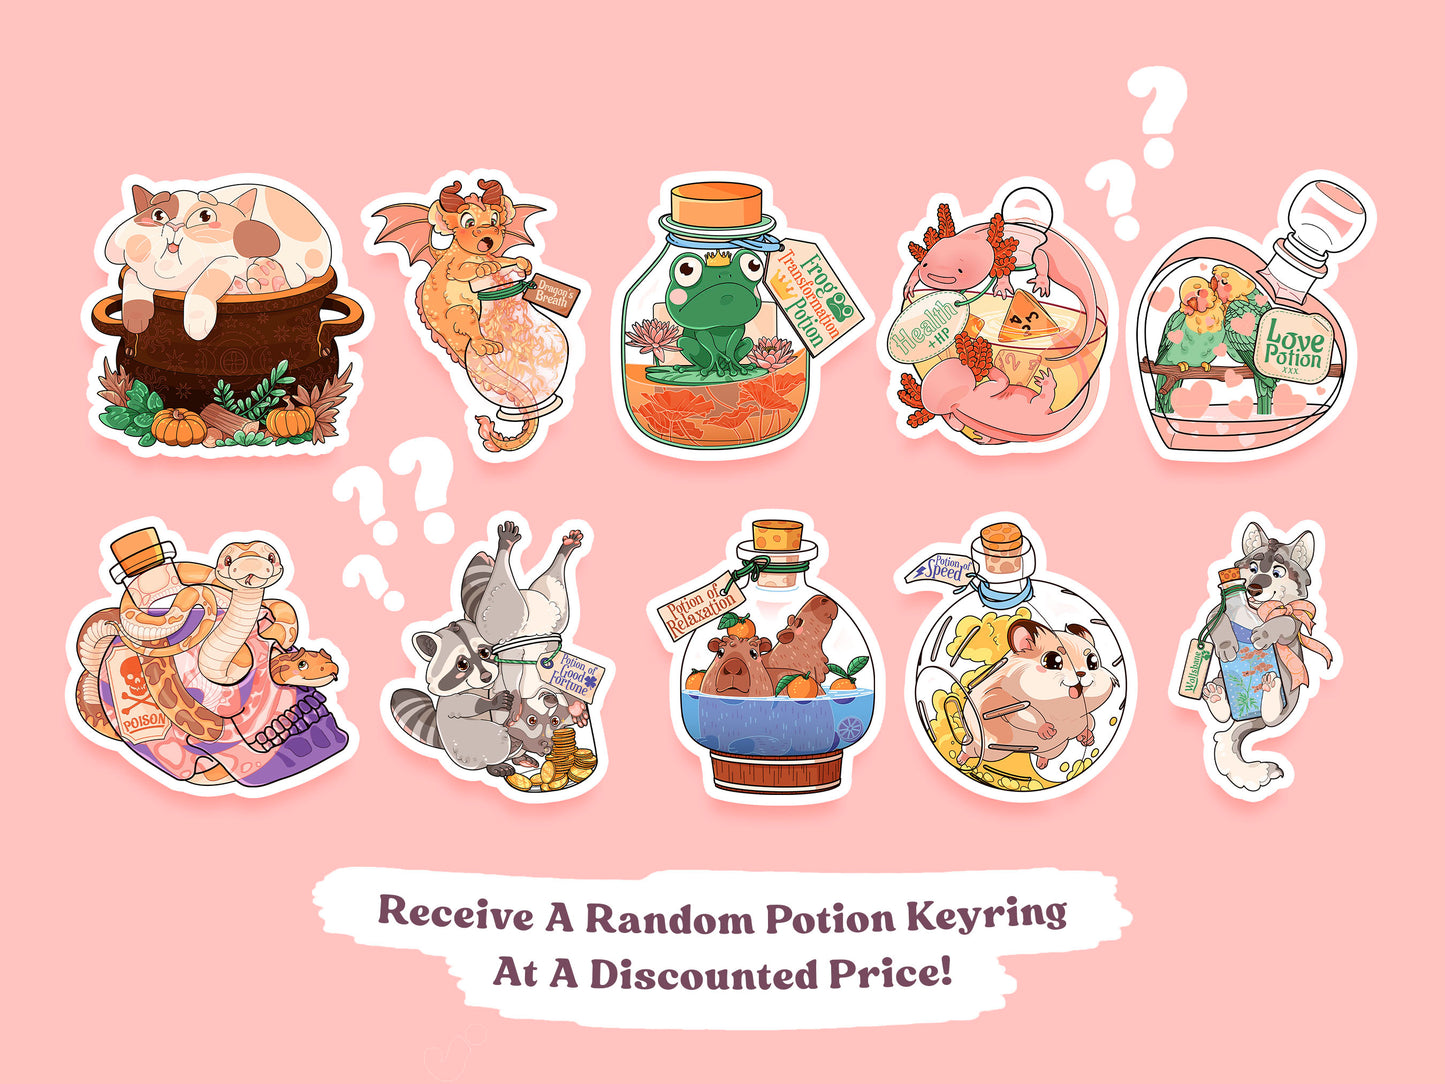 Ten different potion designs all containing cute and whimsical animal characters and potion bottles, with the text below the designs saying Receive a random potion keyring at a discounted price!